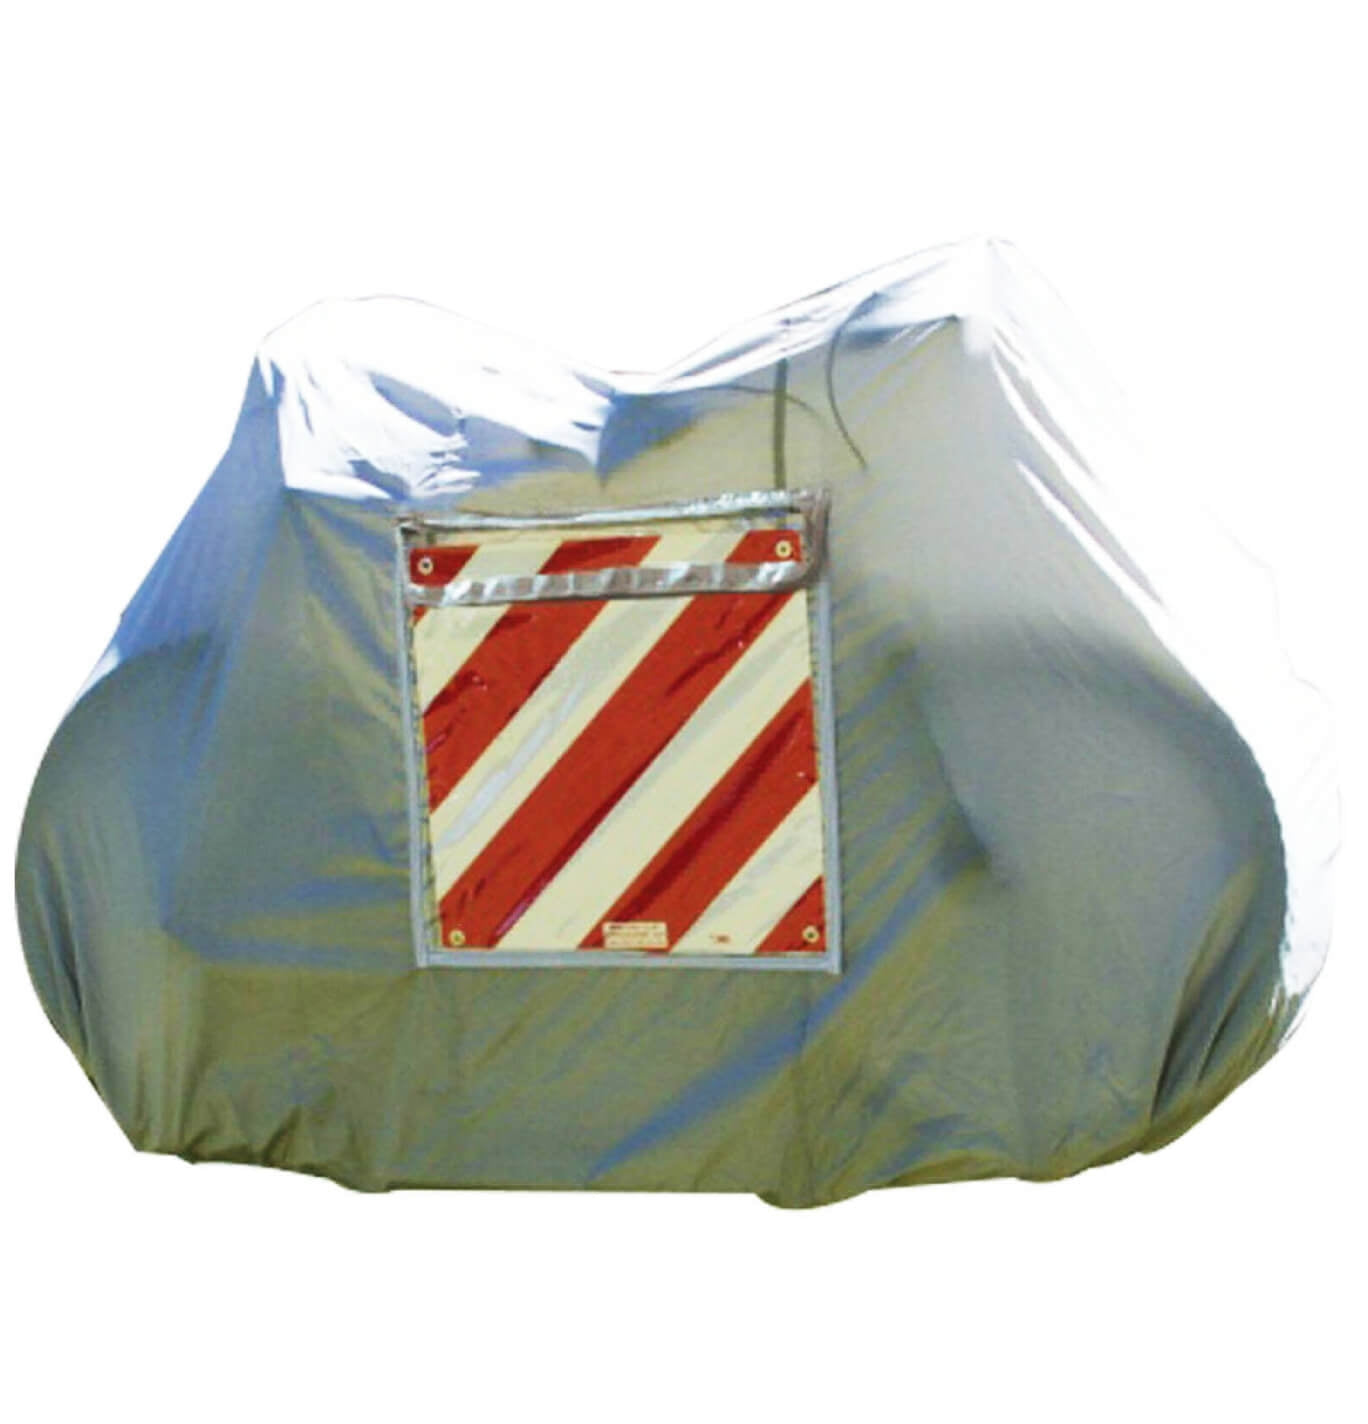 Fiamma Bike Cover S for 4 Bikes | Campers, Motorhomes & Caravans | 08208A01- Image